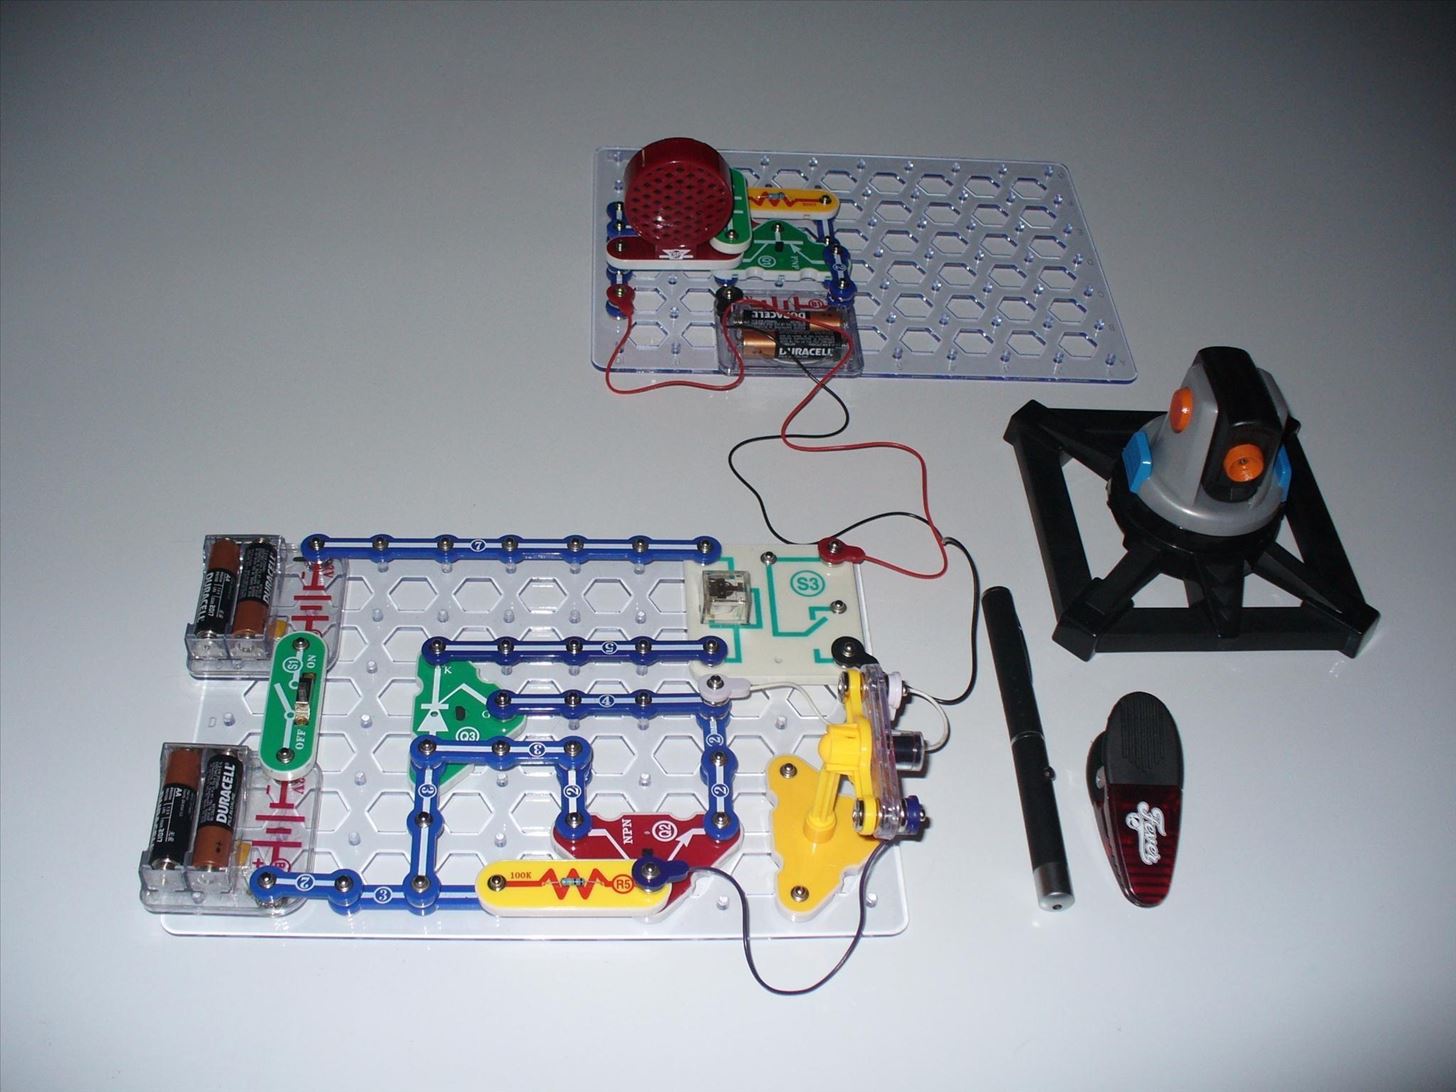 How to Build a Laser Tripwire and Alarm with Snap Circuits